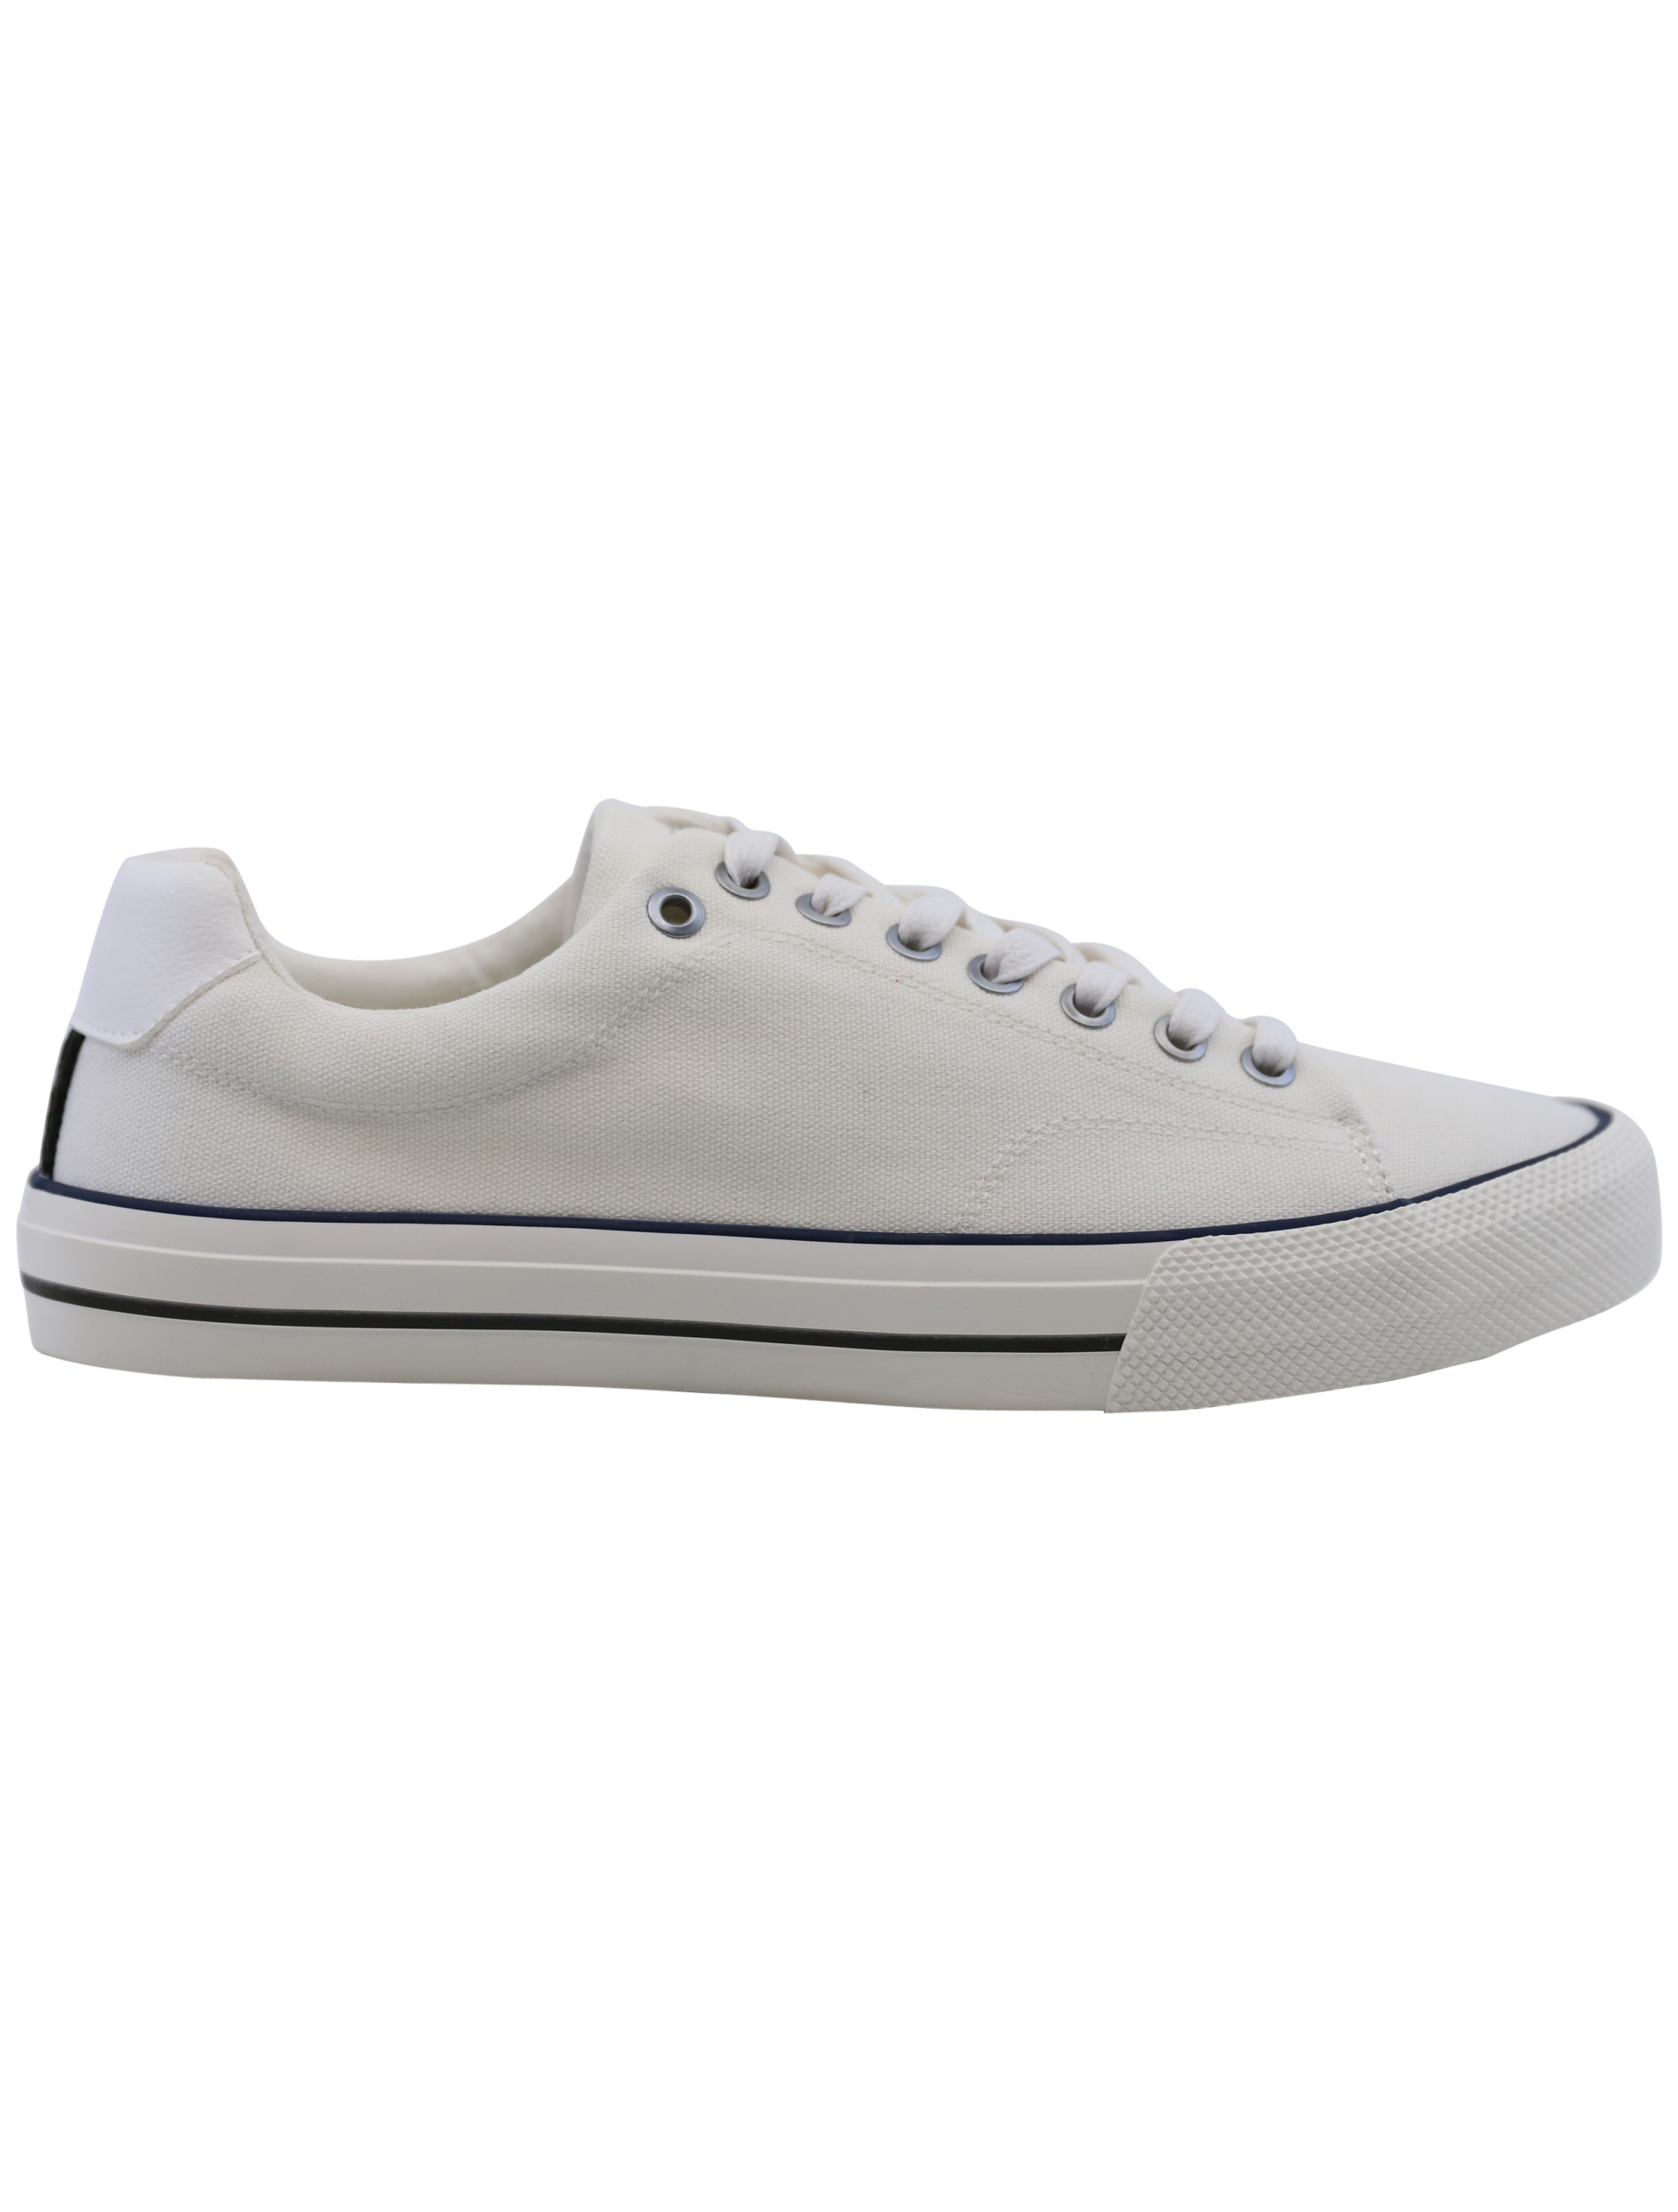 Lindbergh Sneakers weiss / off white